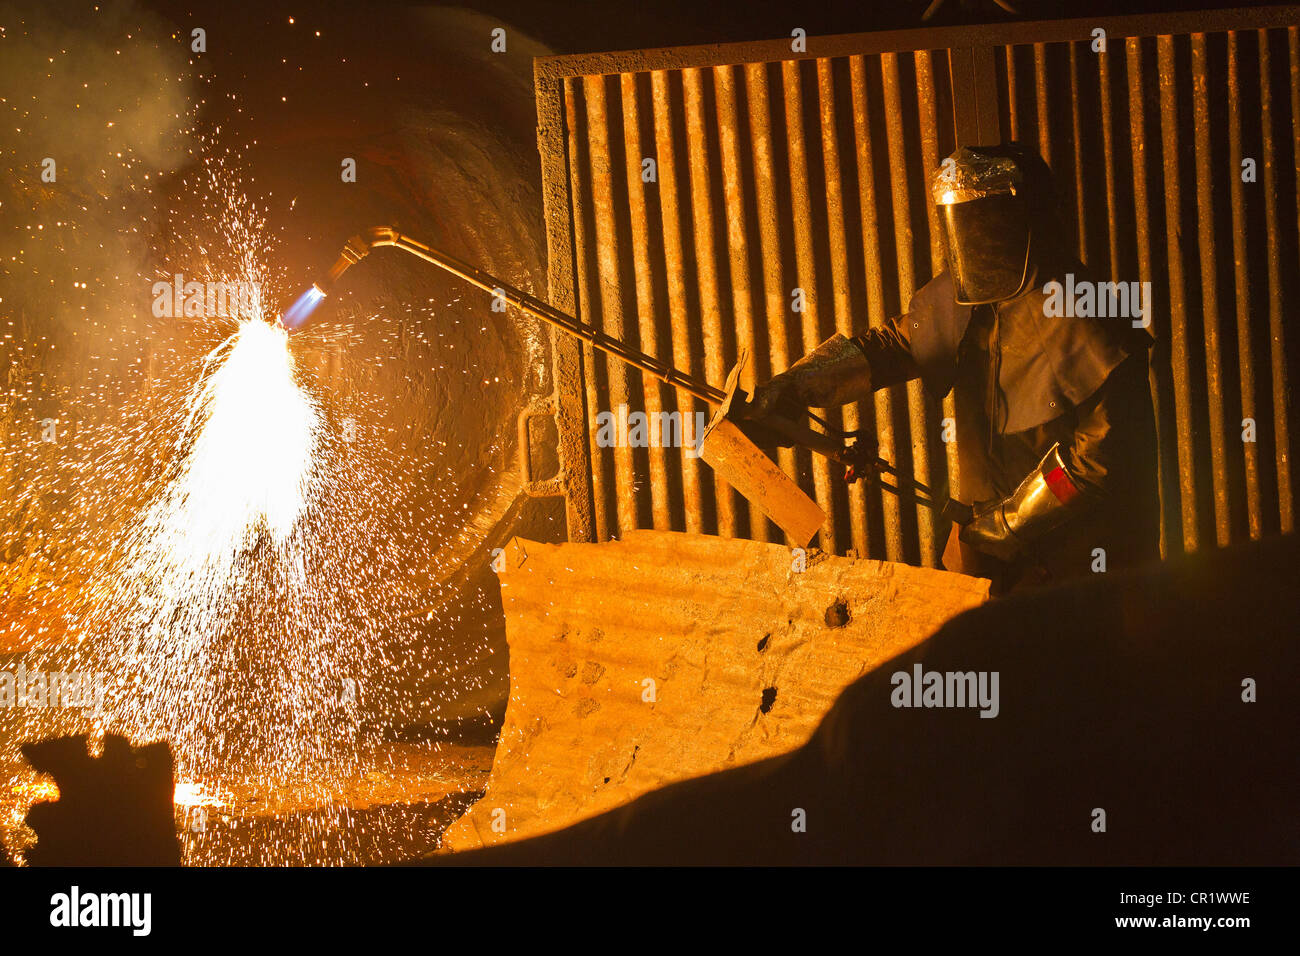 Welder at work in steel forge Stock Photo